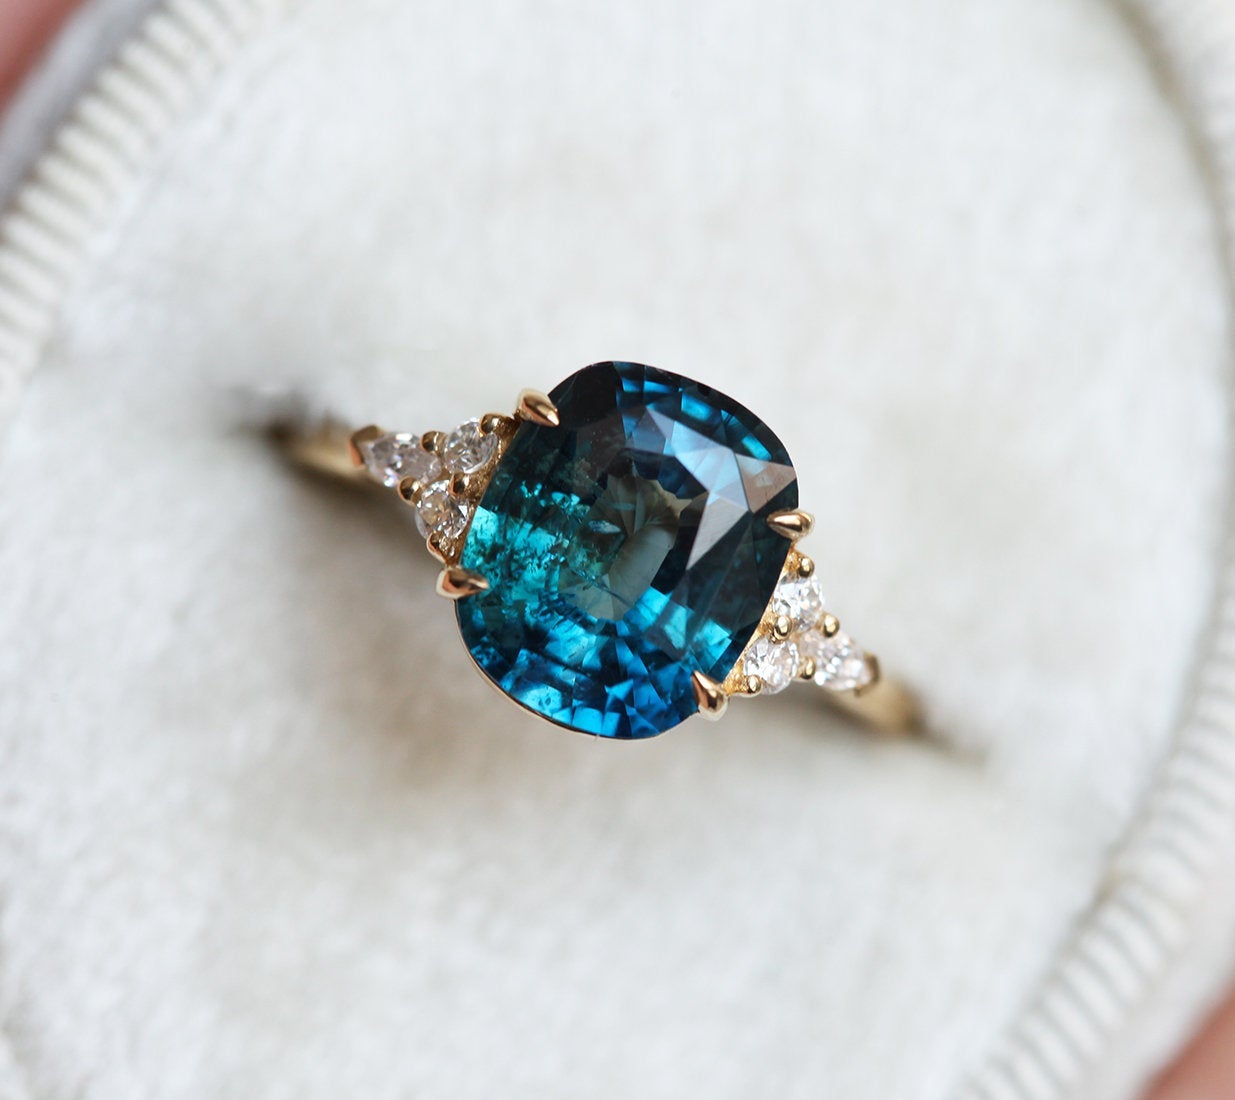 Cushion-cut blue green sapphire cluster ring with diamonds